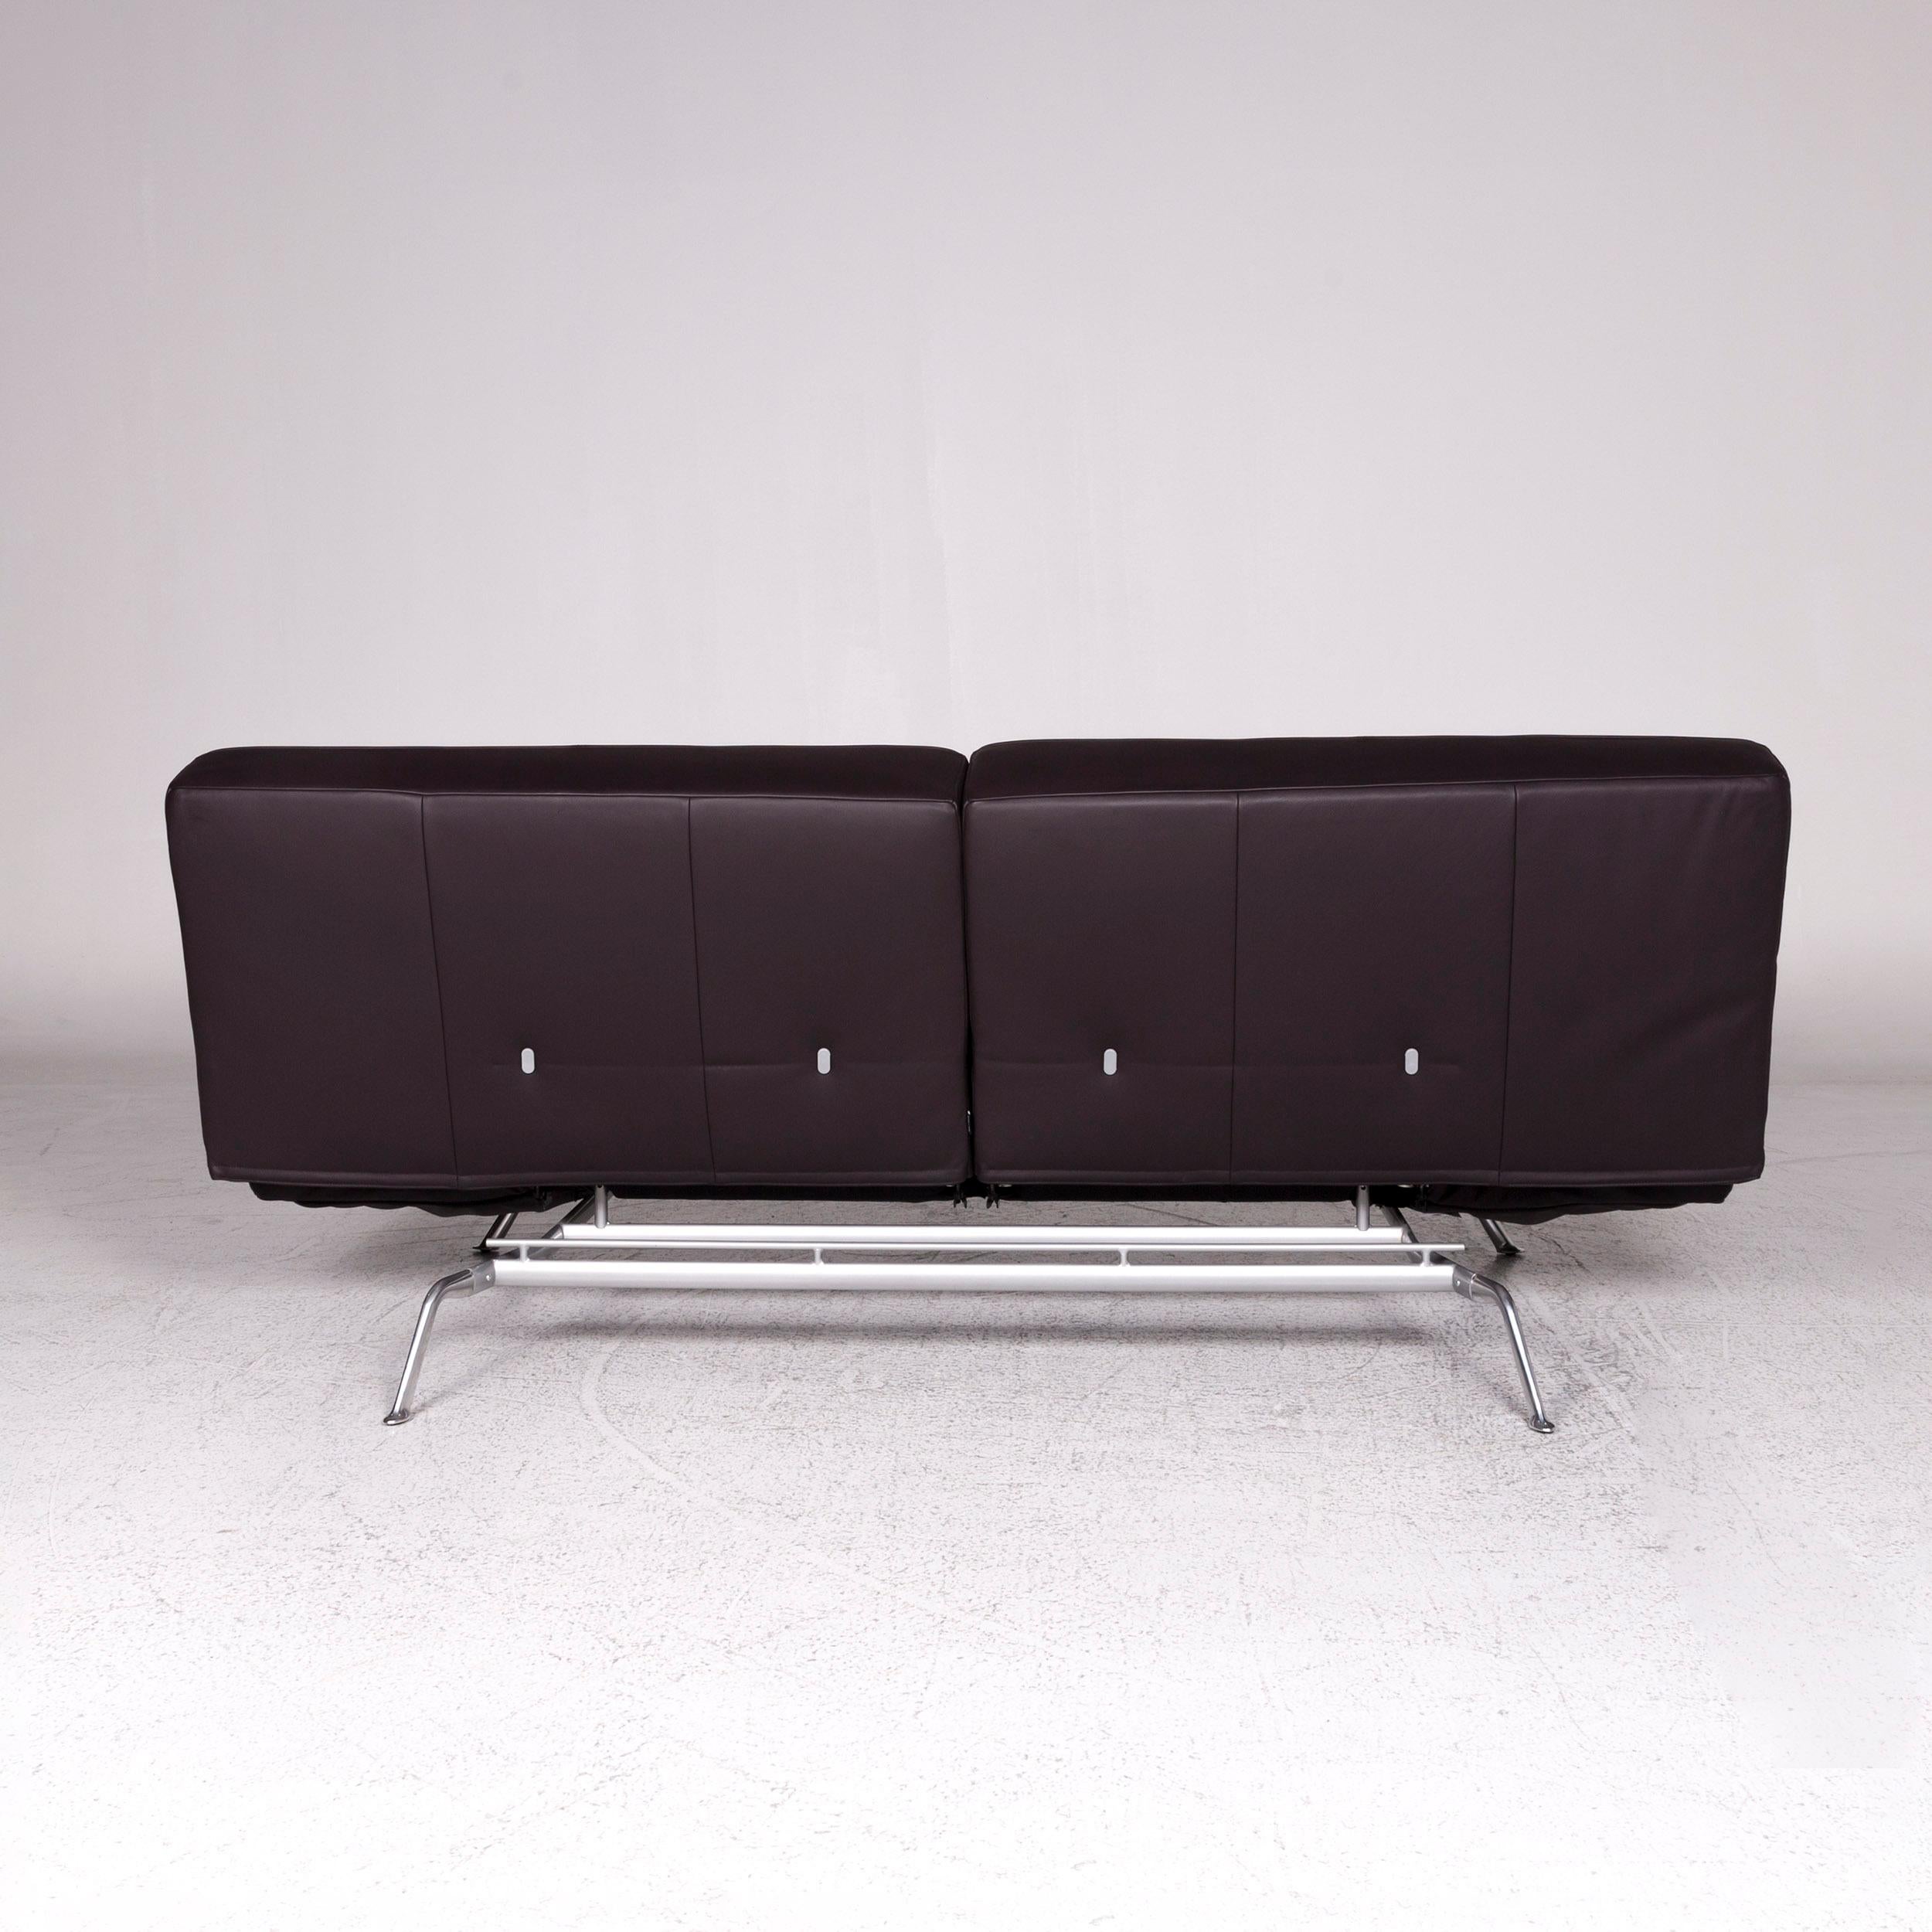 Contemporary Ligne Roset Smala Leather Sofa Eggplant Two-Seat Sofa Bed Function Couch